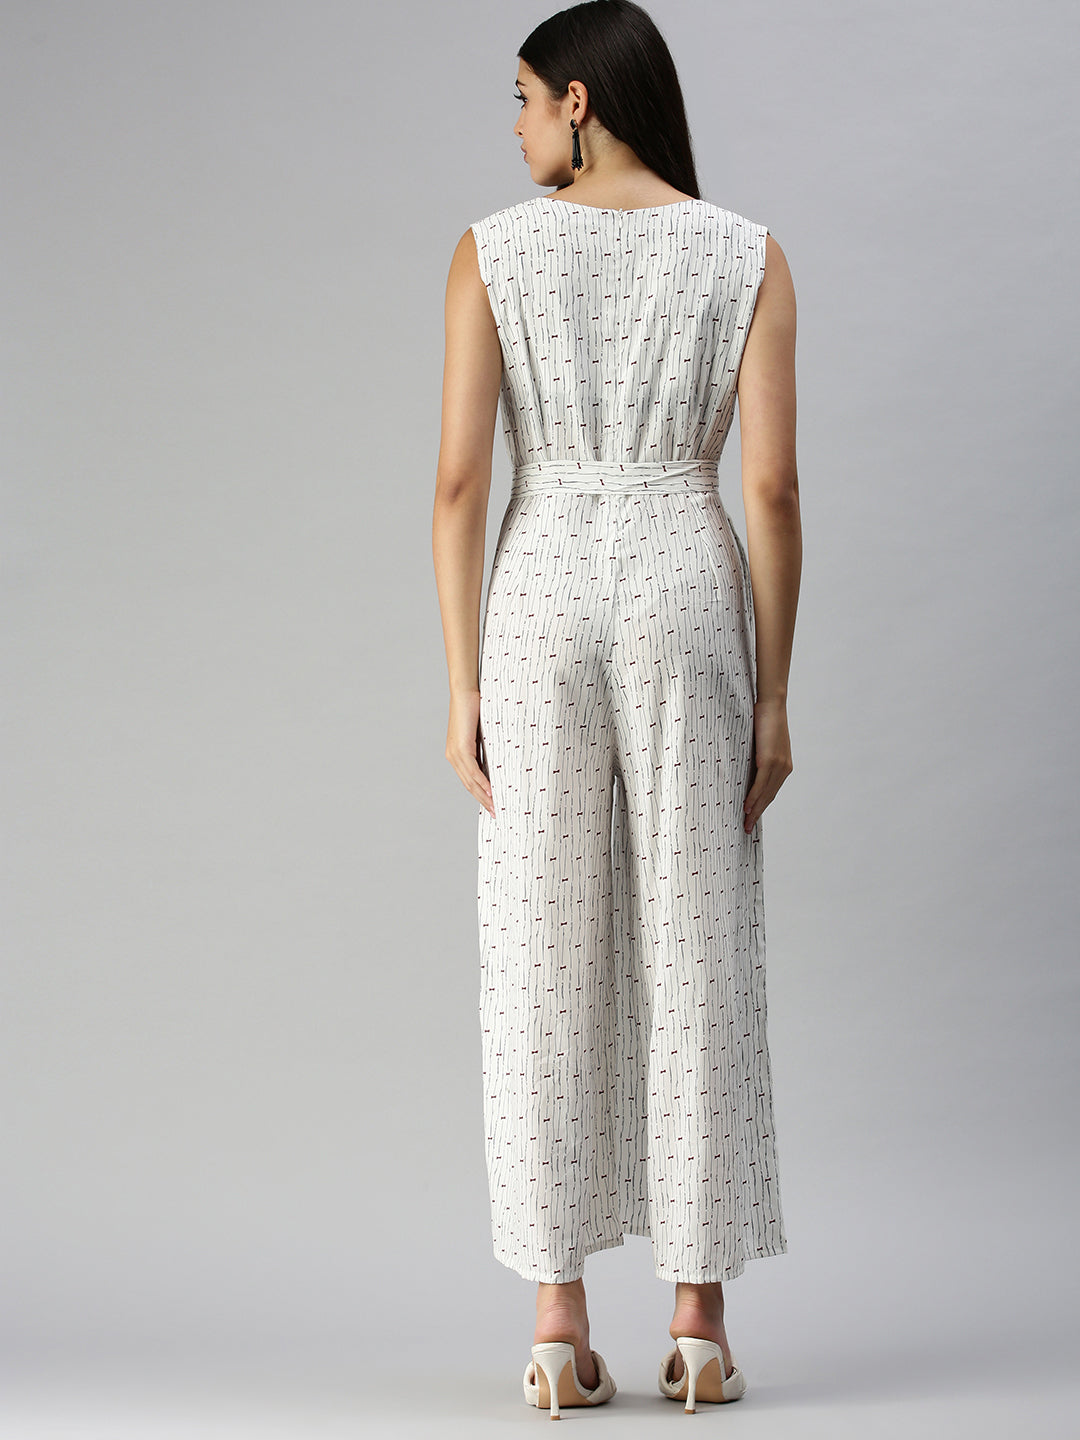 Women's White Printed Jumpsuits